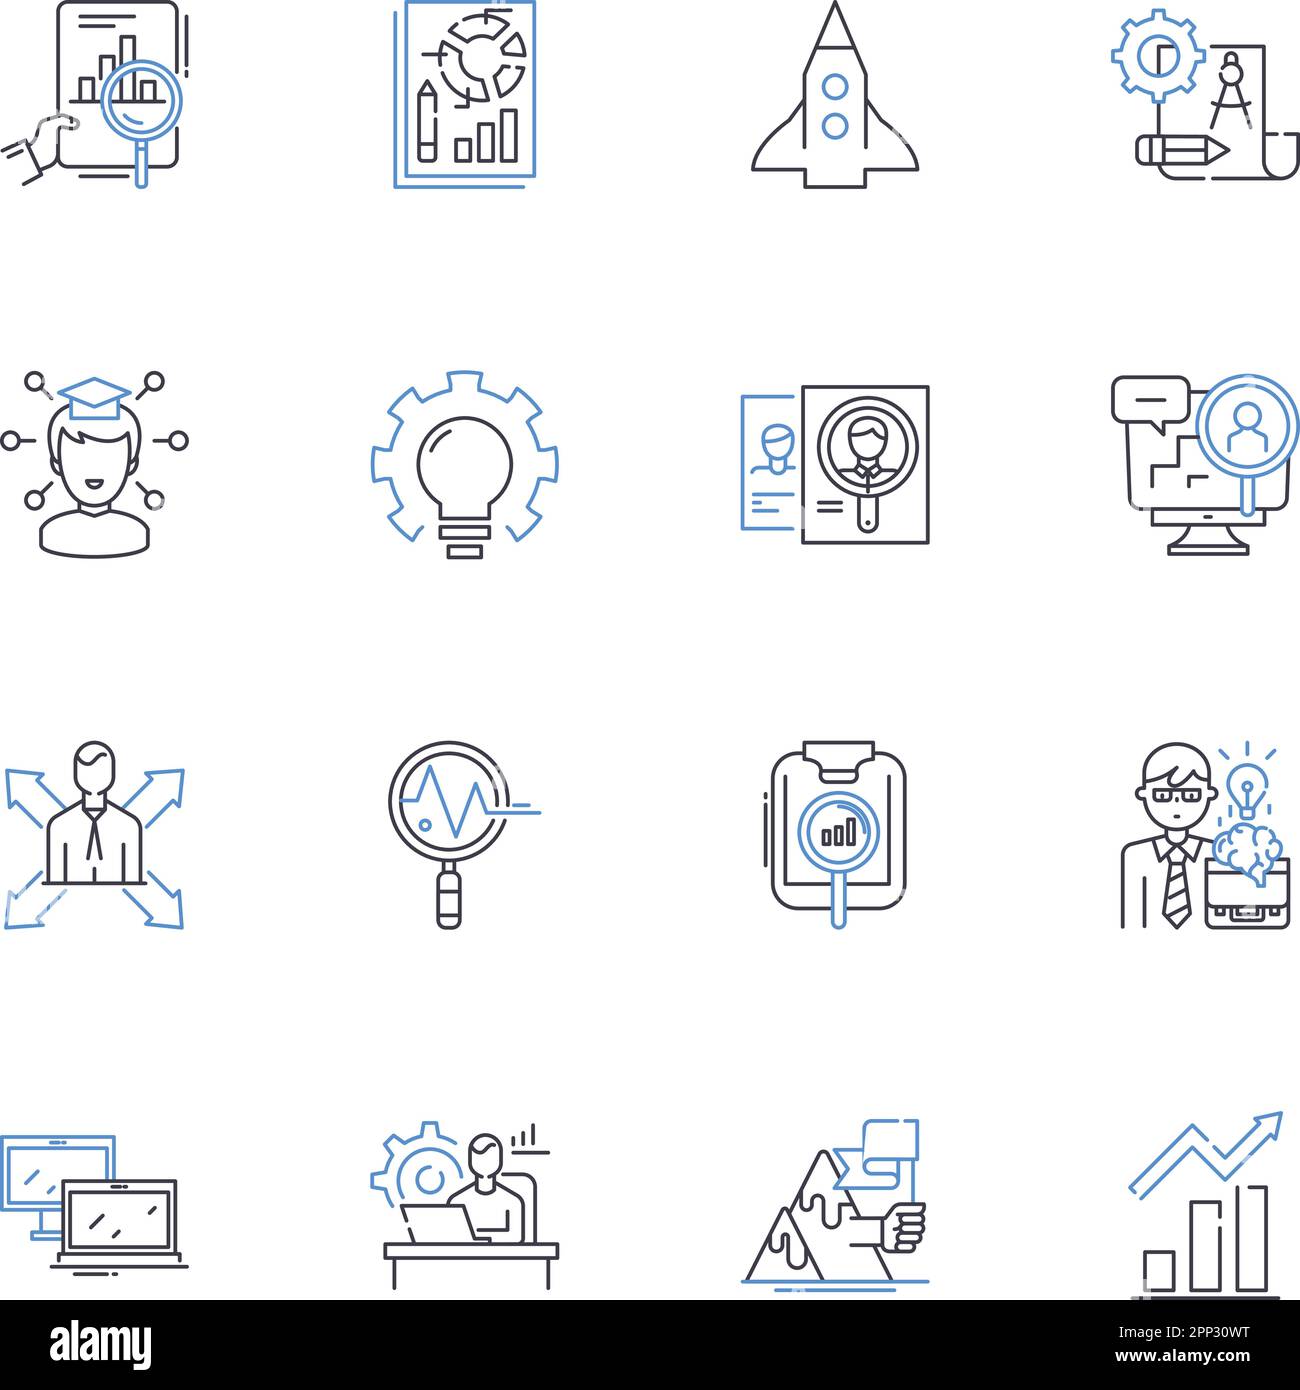 Program line icons collection. Code, Software, Application, Algorithm, Script, Debug, Compiling vector and linear illustration. Interface,Command Stock Vector